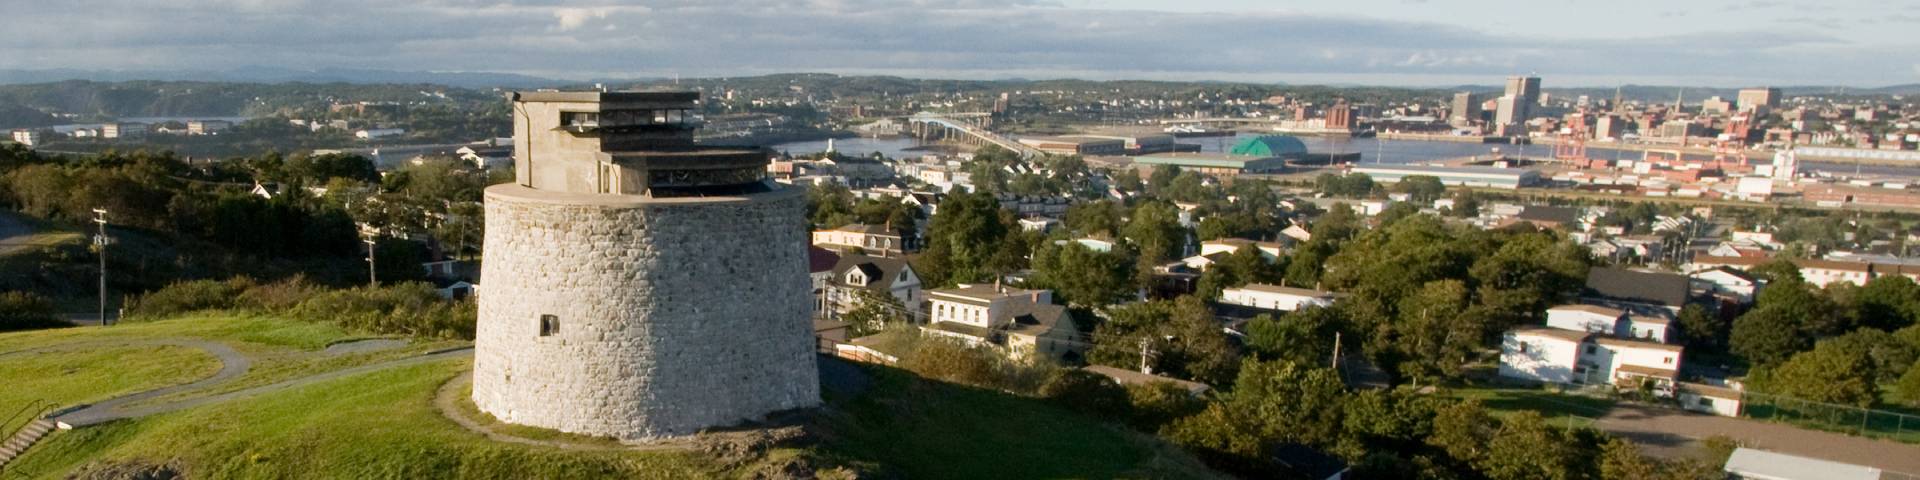 a white tower on a hill that overlooks a city